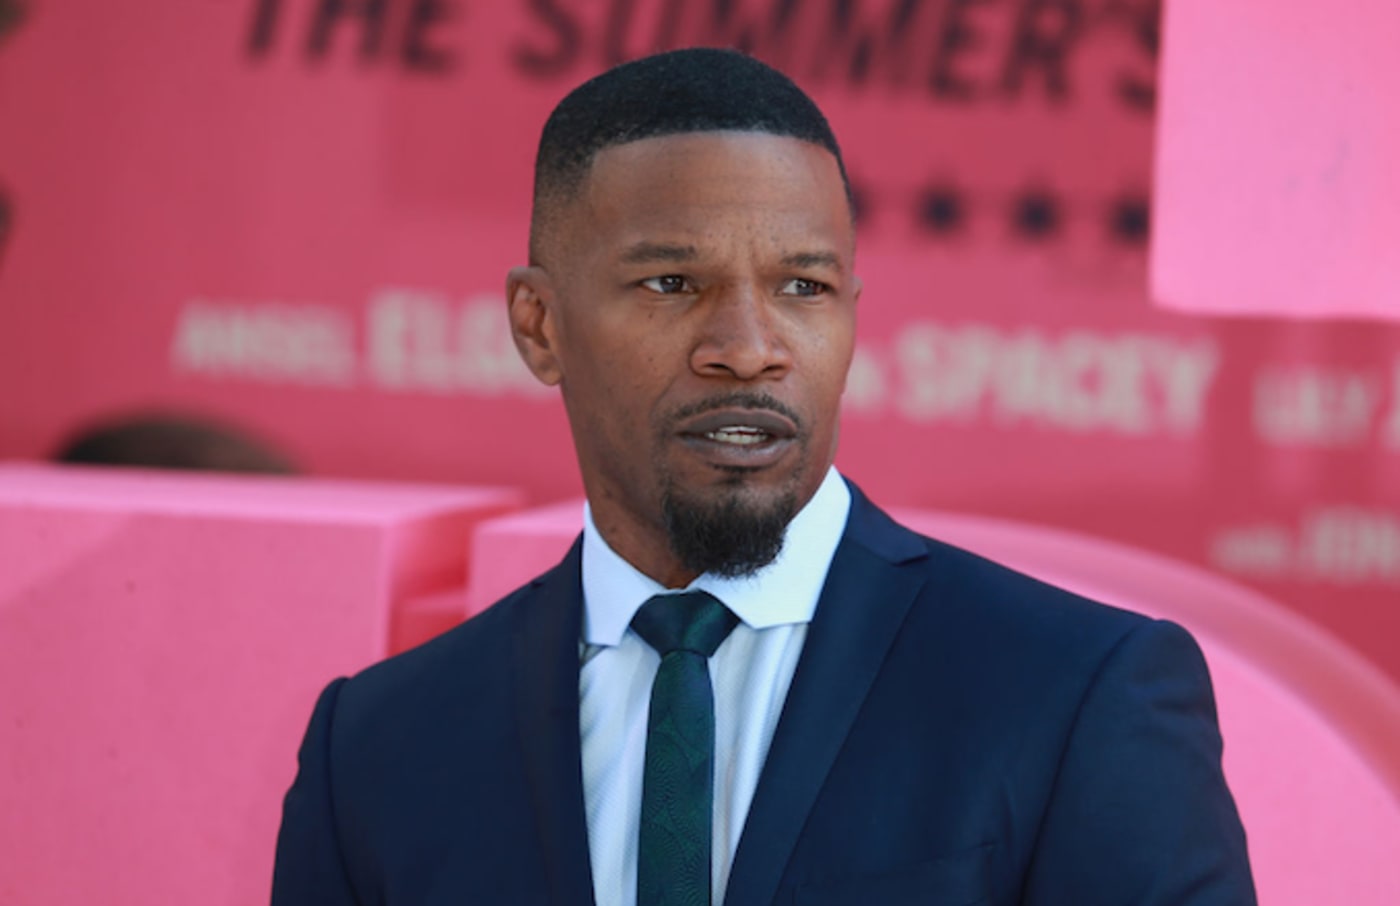 Jamie Foxx at the 'Baby Driver' premiere